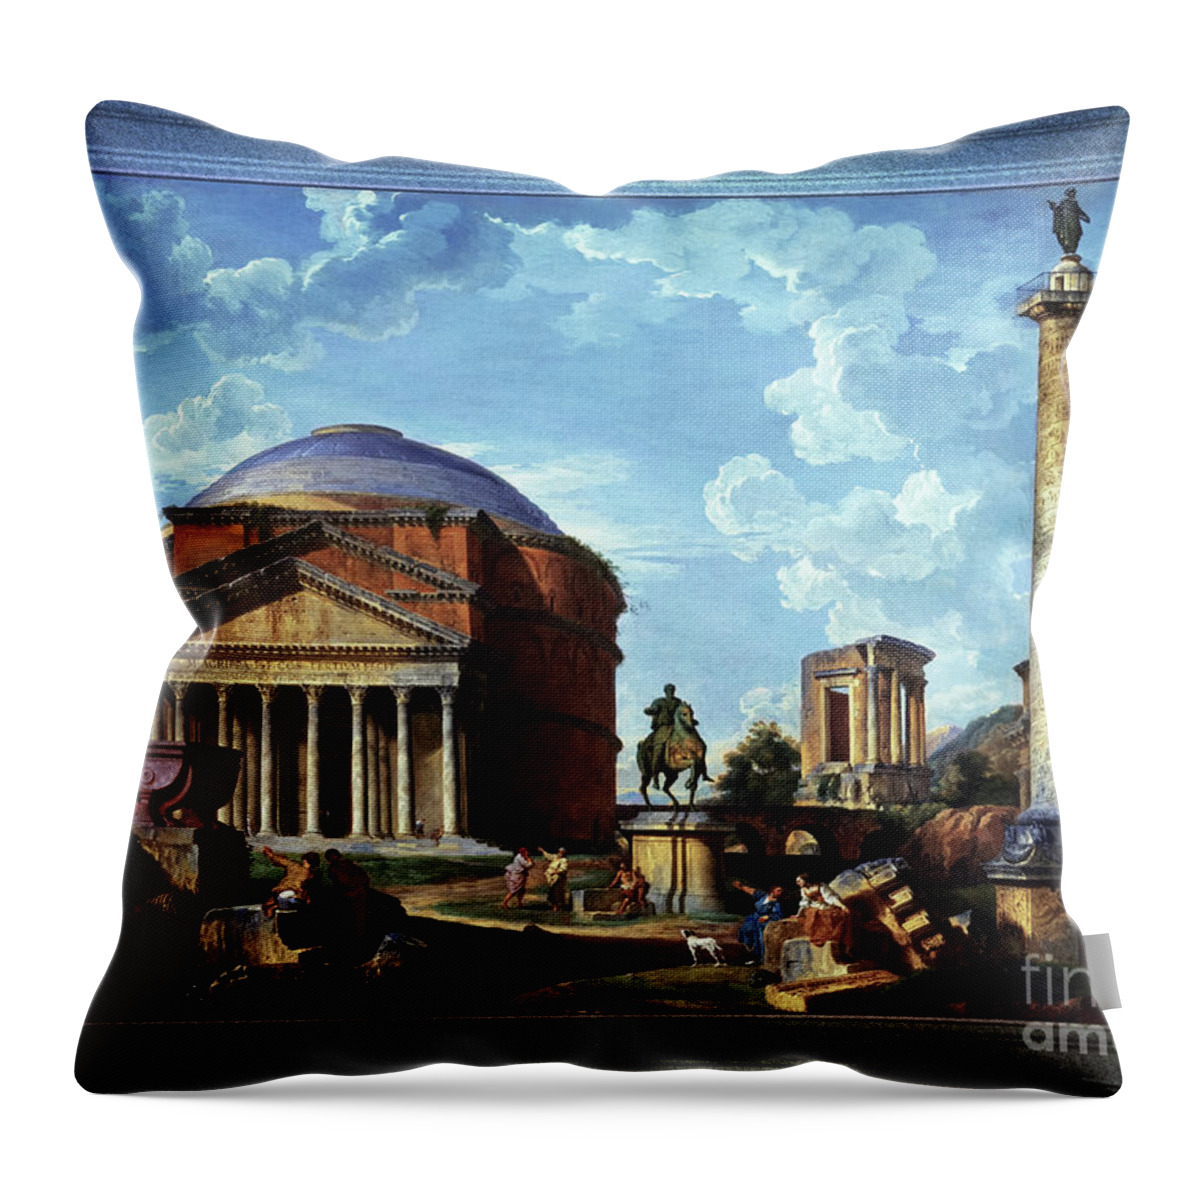 Architectural Fantasy Throw Pillow featuring the painting Fantasy View with the Pantheon and other Monuments of Old Rome by Rolando Burbon